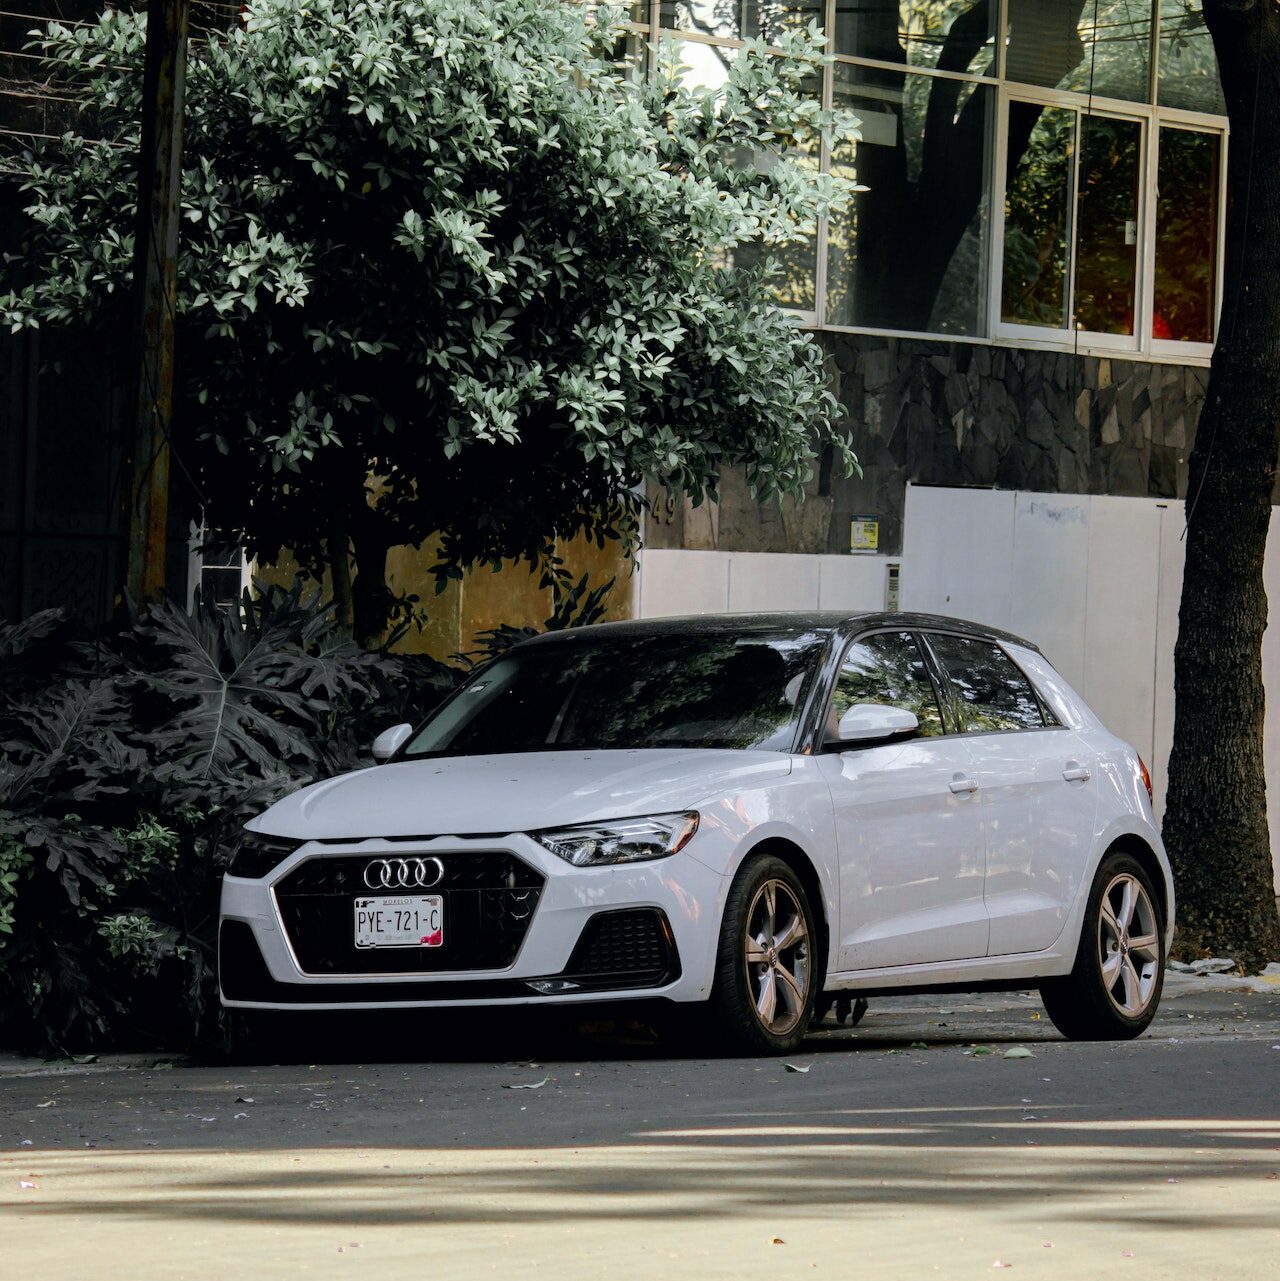 Is the Audi A3 a good reliable car?